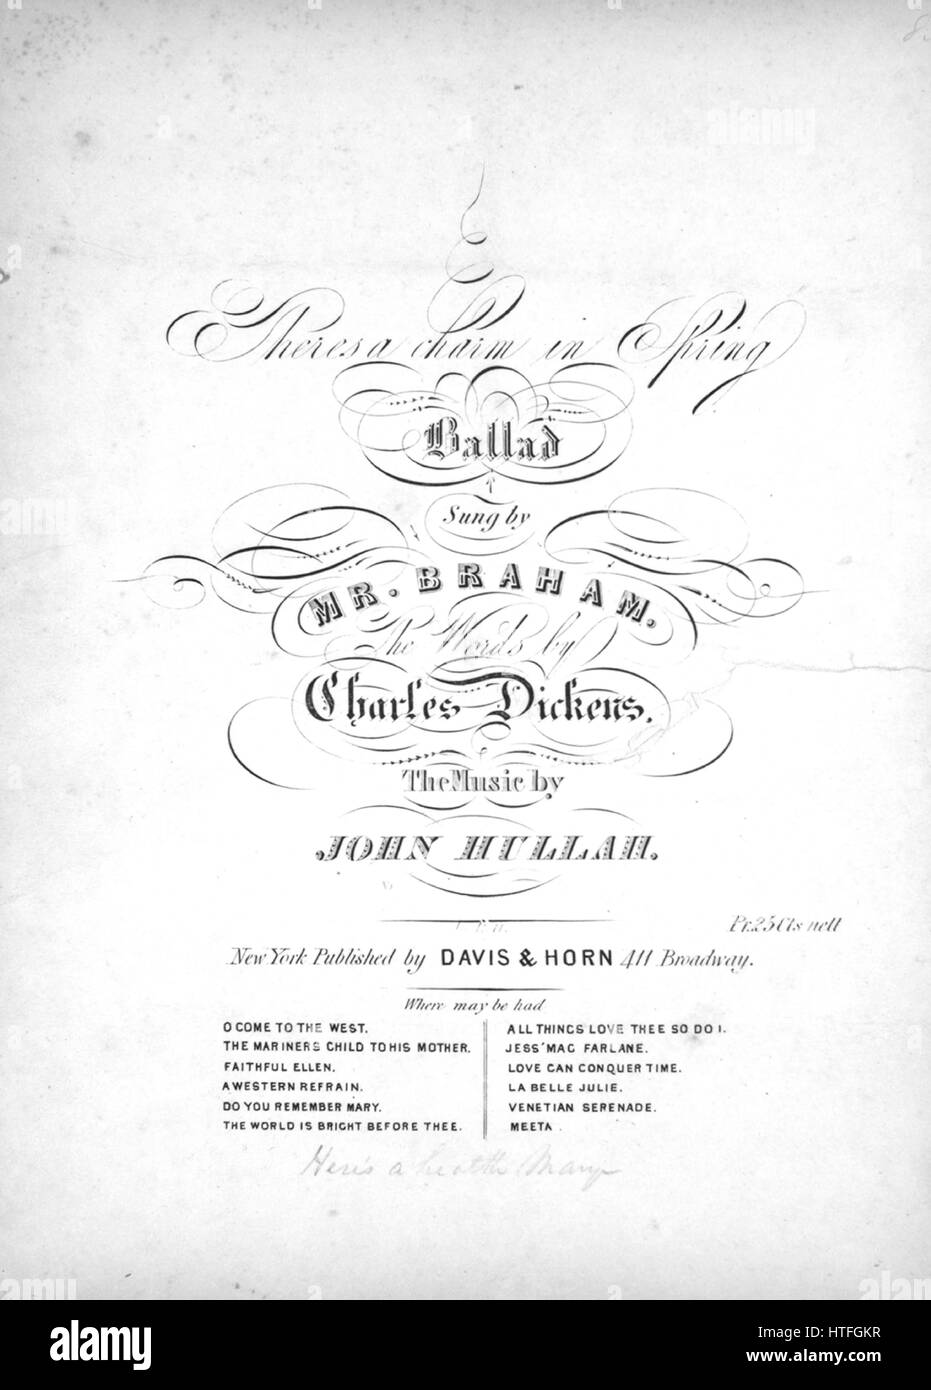 Sheet music cover image of the song 'There's a Charm in Spring Ballad', with original authorship notes reading 'The Words by Charles Dickens The Music by John Hullah', United States, 1900. The publisher is listed as 'Davis and Horn, 411 Broadway', the form of composition is 'strophic', the instrumentation is 'piano and voice', the first line reads 'There's a charm in spring, when ev'rything, Is bursting from the ground', and the illustration artist is listed as 'Samuel Ackerman Engr. and Pr.'. Stock Photo